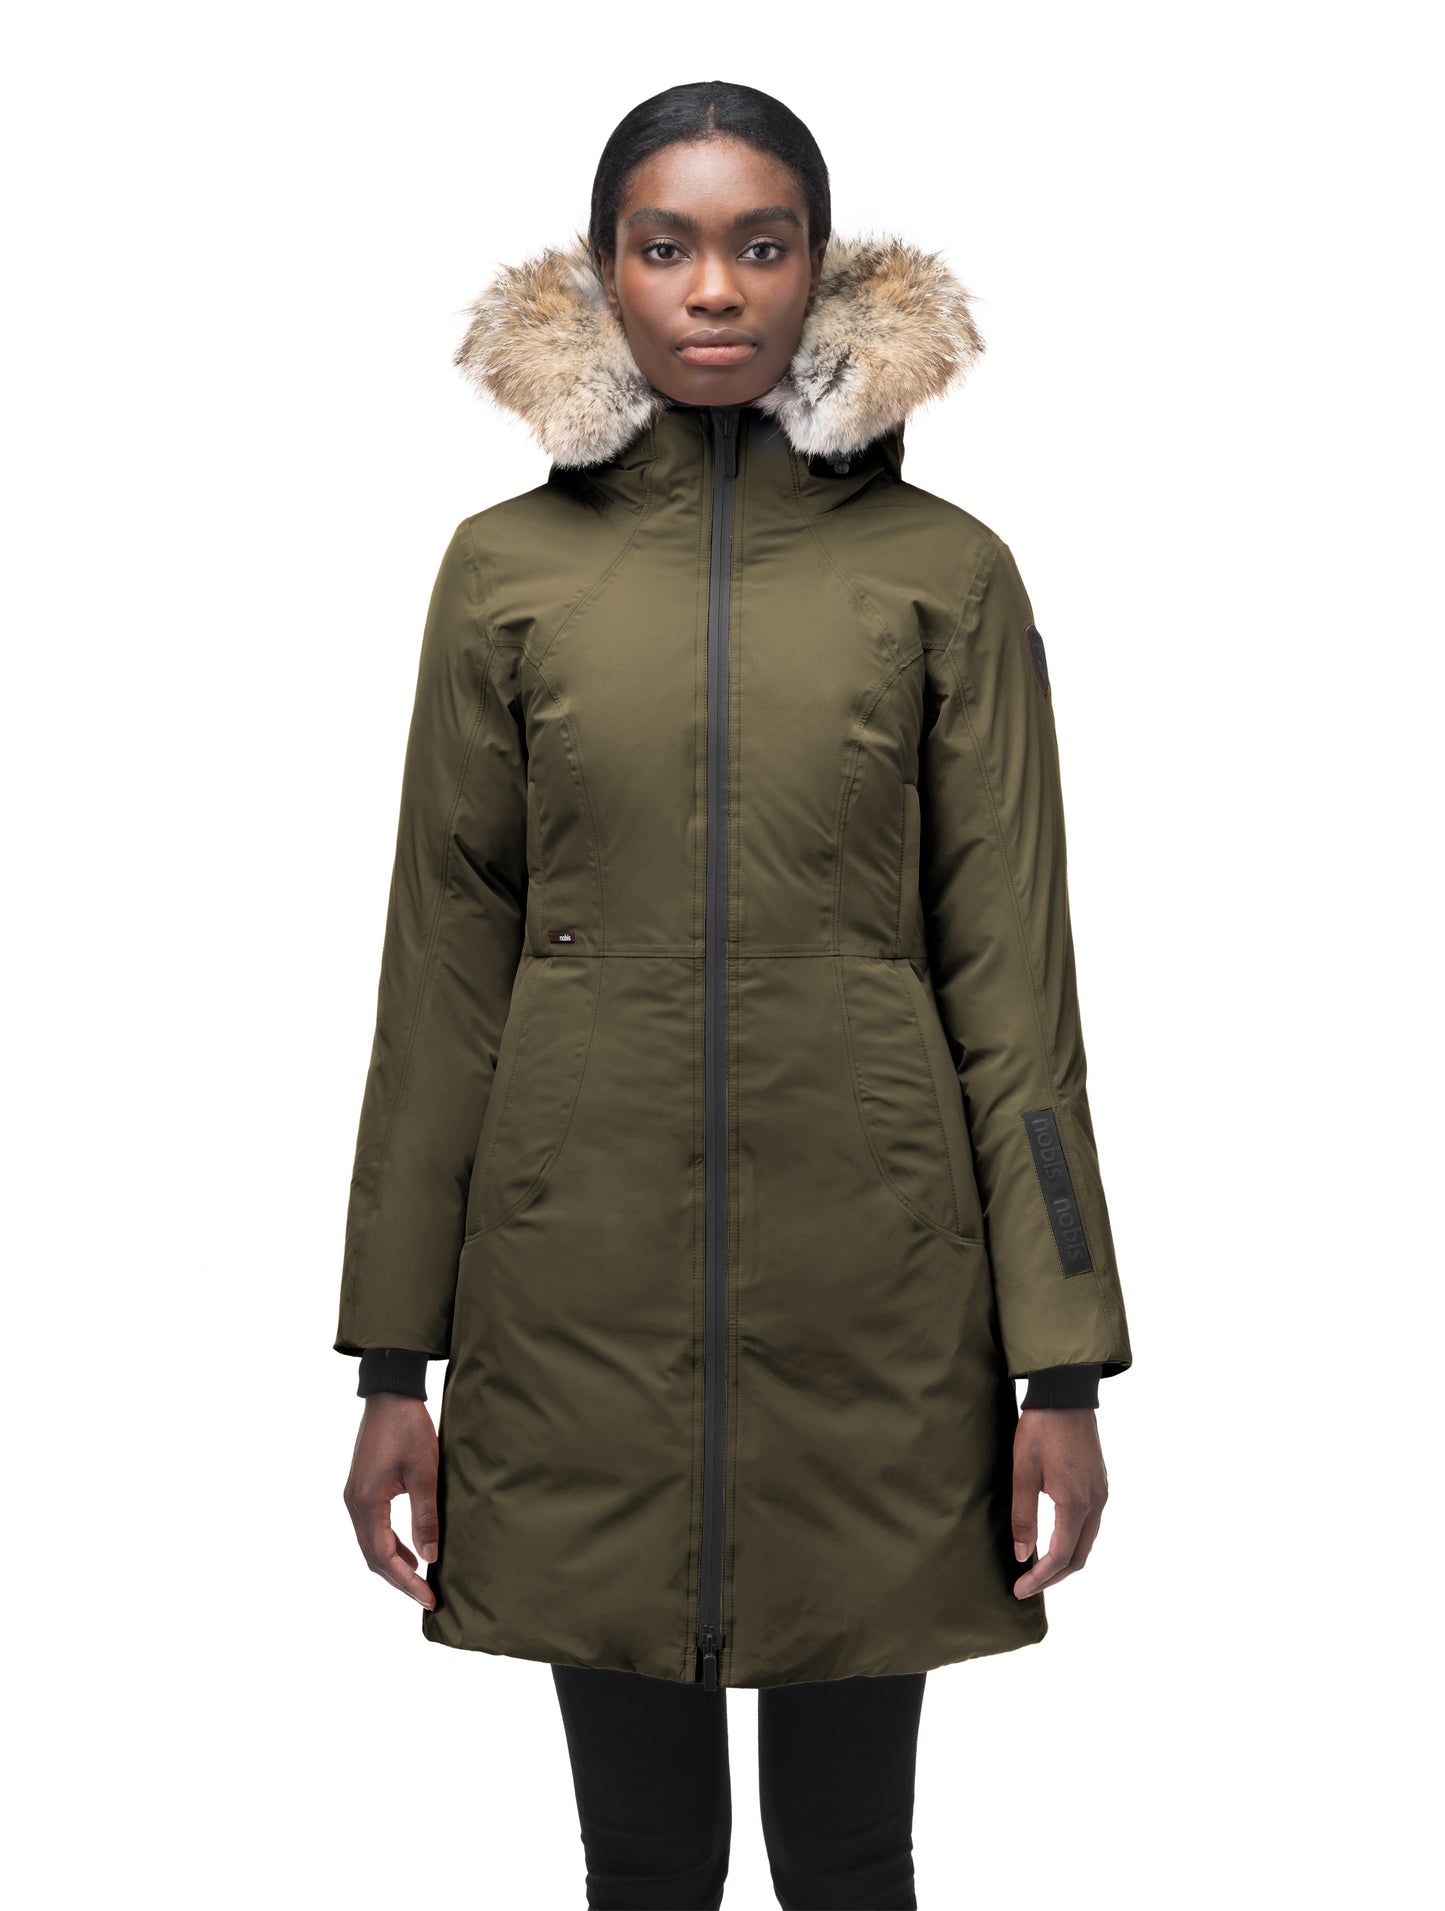 Down with the Cold: The Arctic Parka